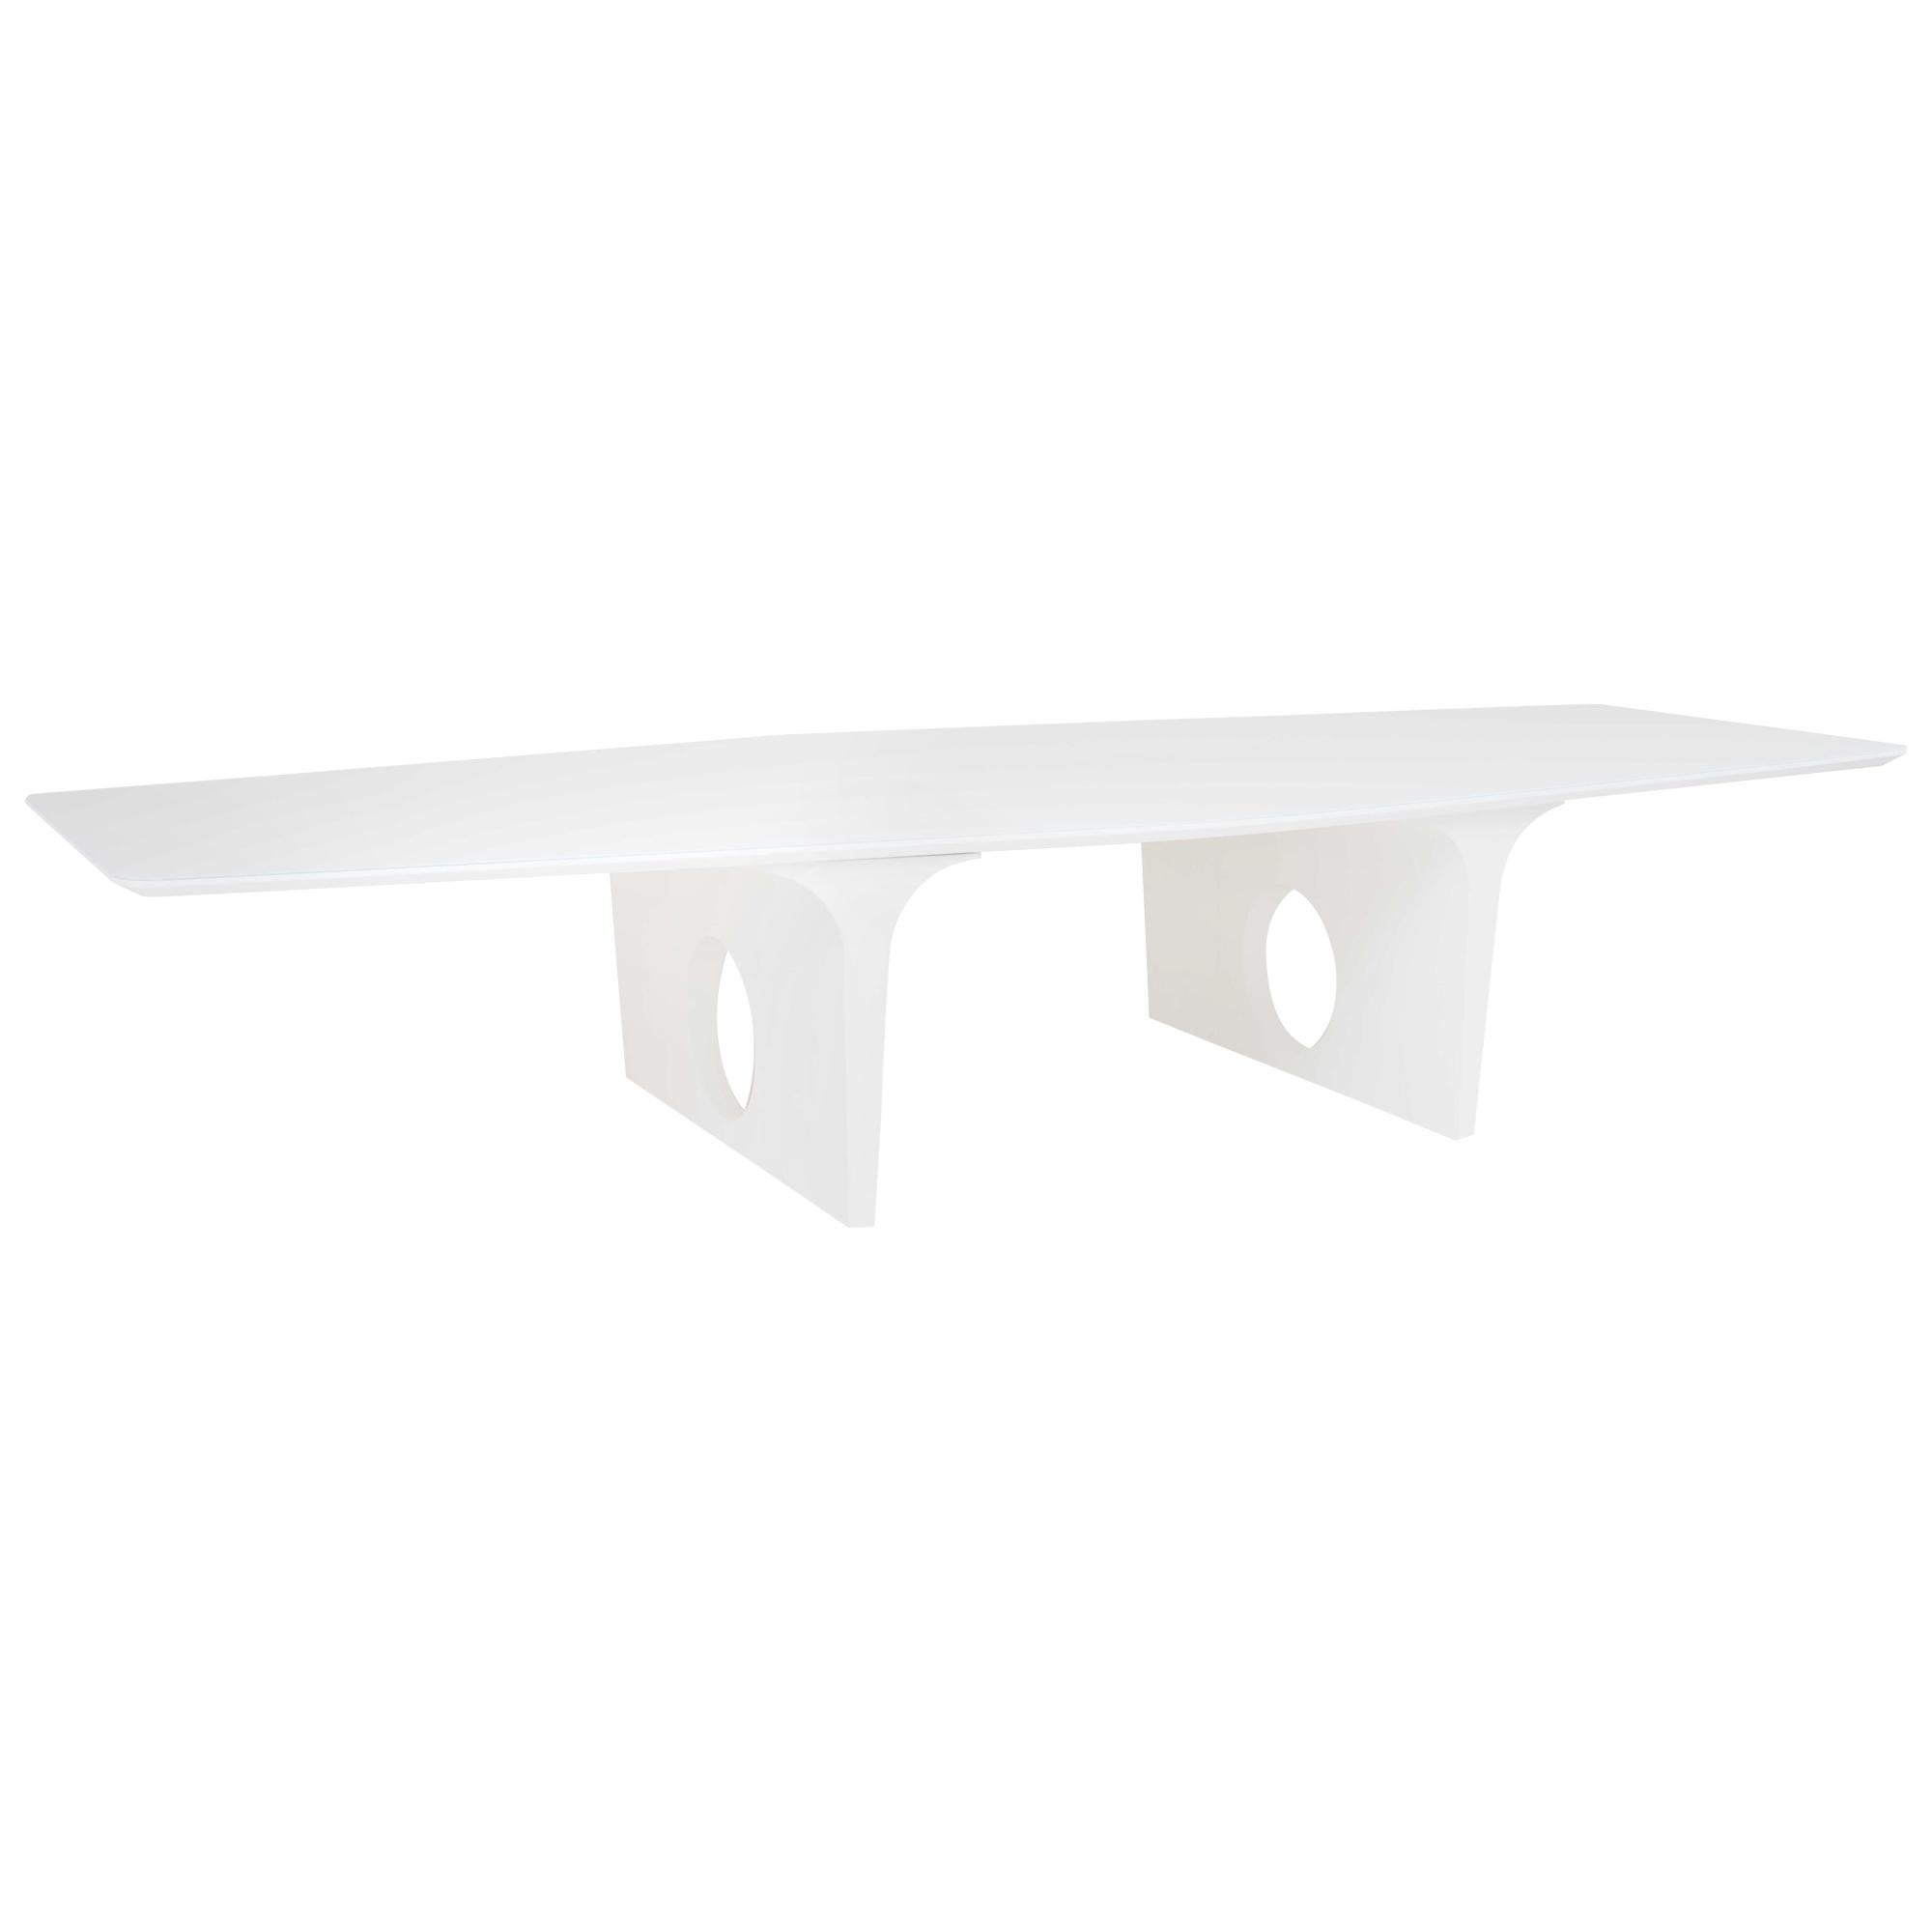 White Lacquer Rectangular Dining Table Dalton For Sale